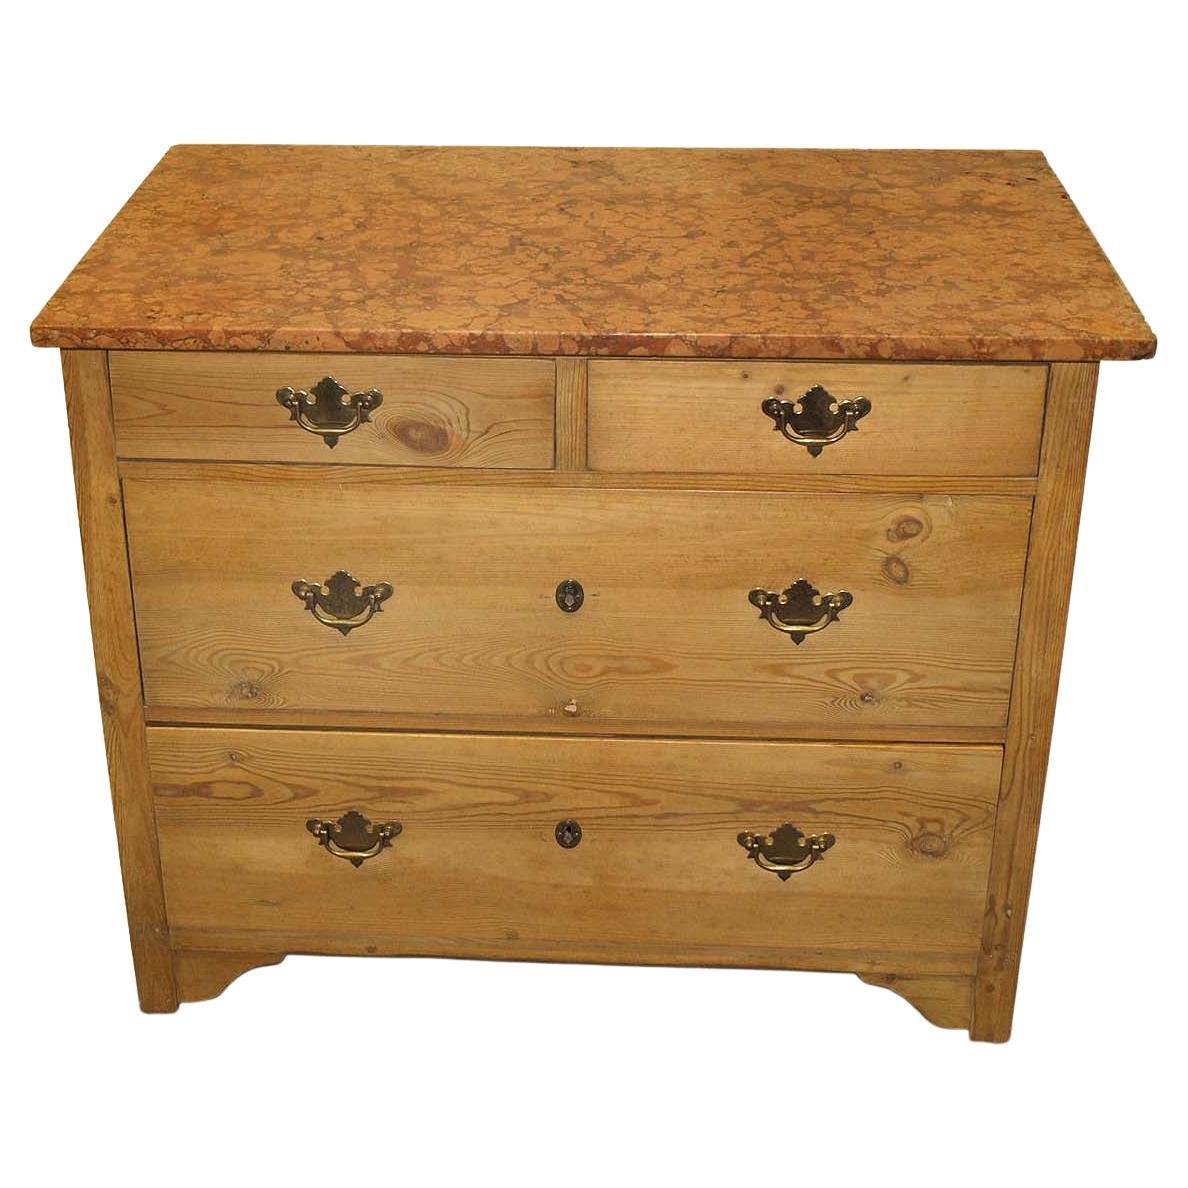 English Pine Marble Top Chest